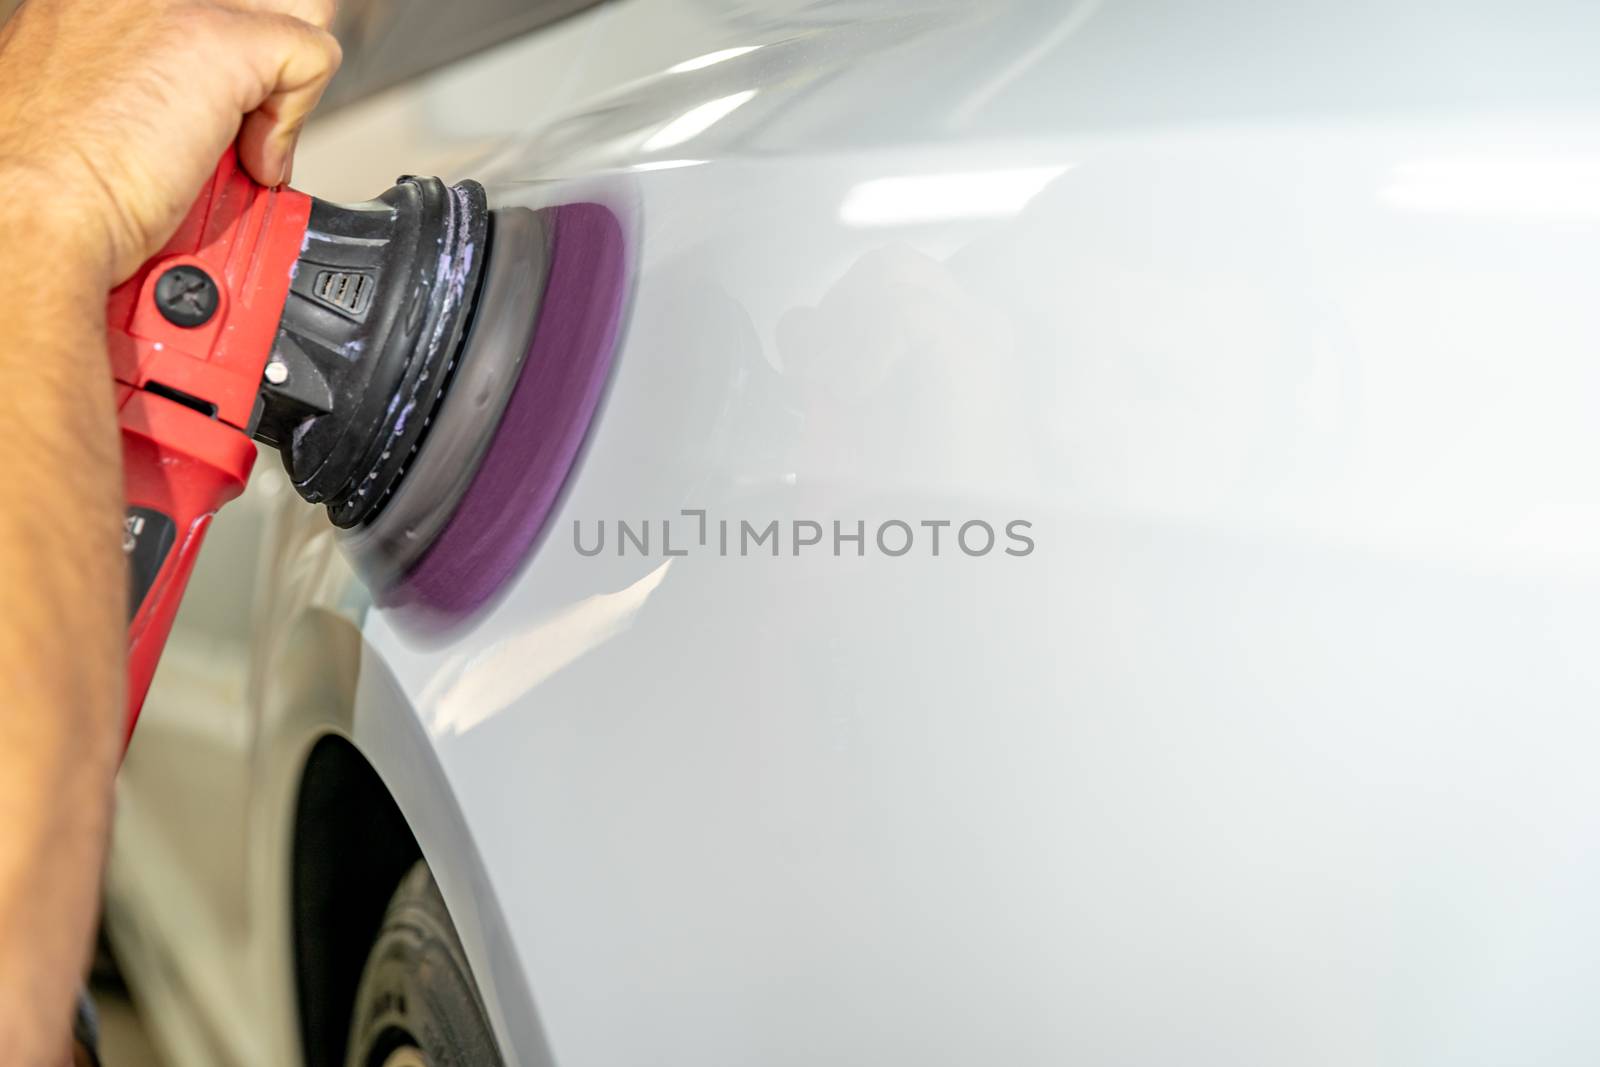 polishing the car body with a manual automatic grinder with wax and polishing paste by Edophoto